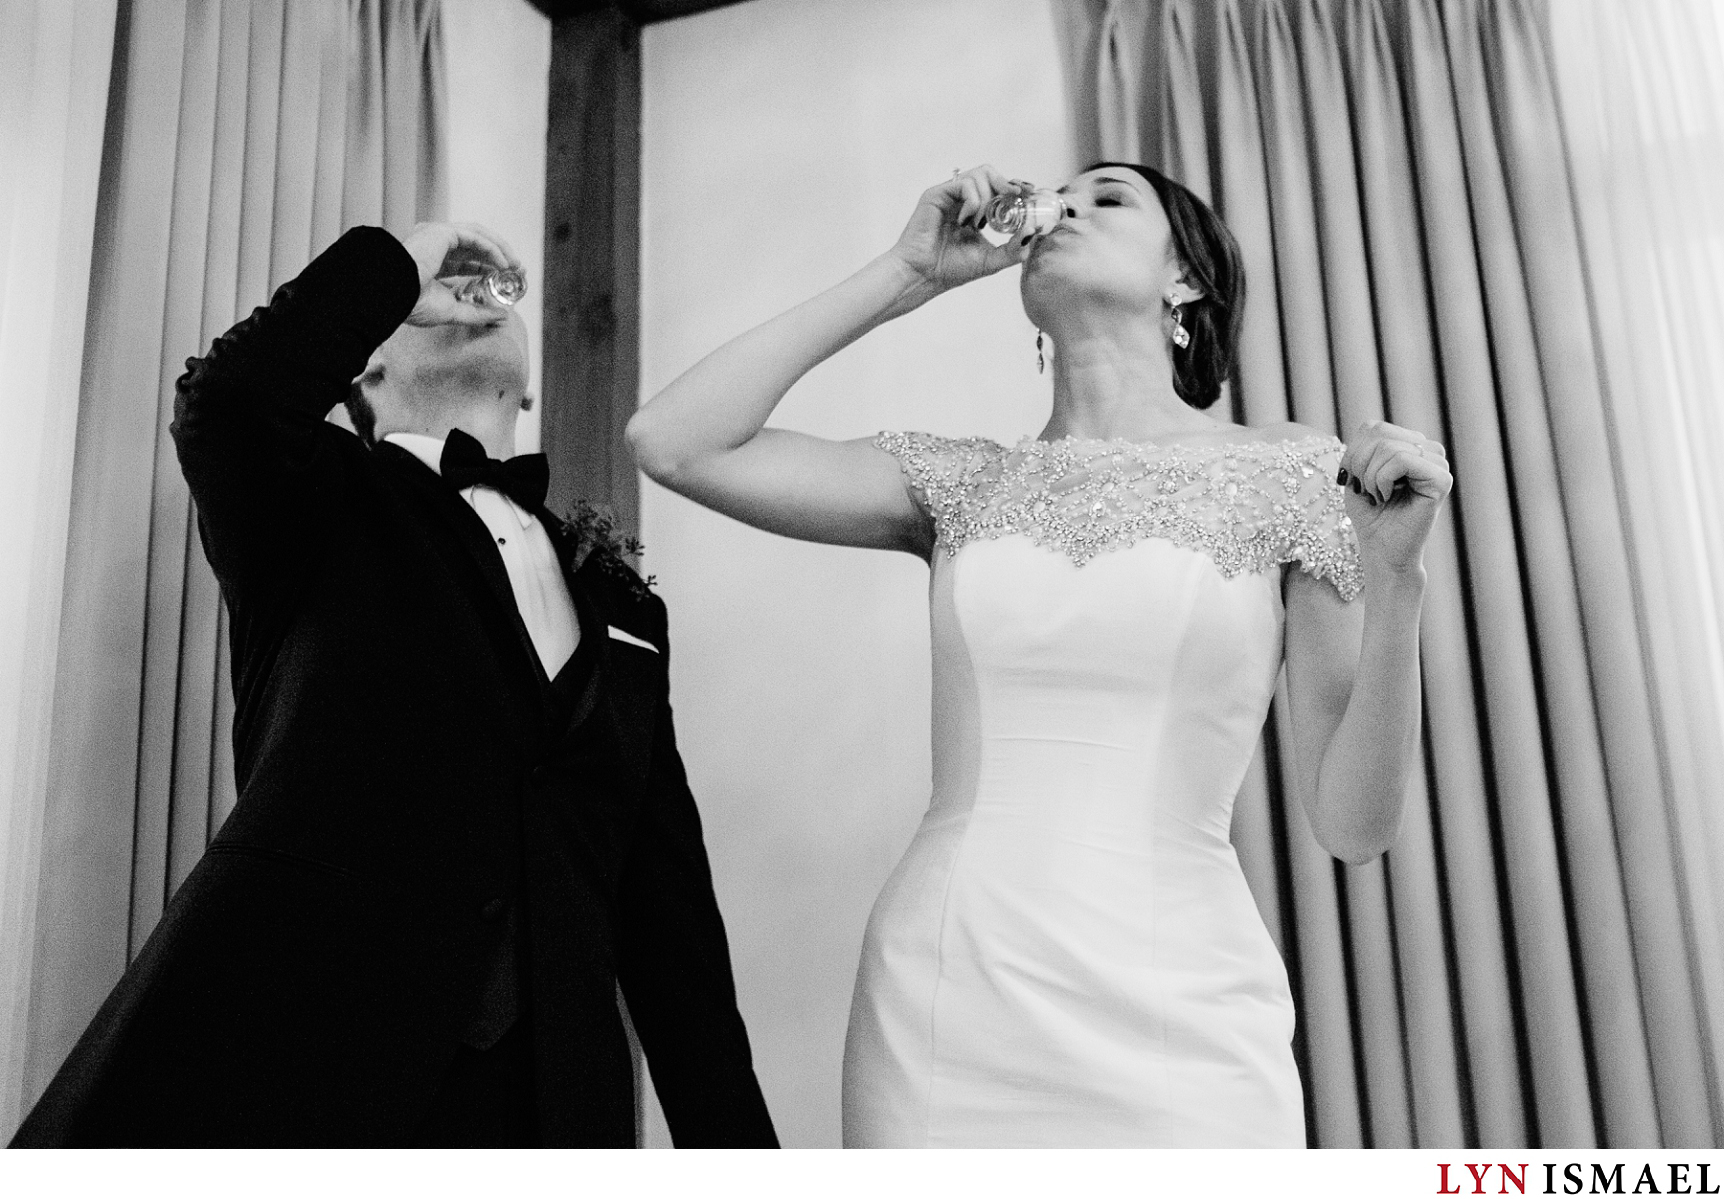 A polish wedding tradition of srinking a shot of vodka to determin who will hold the pants in the marriage.